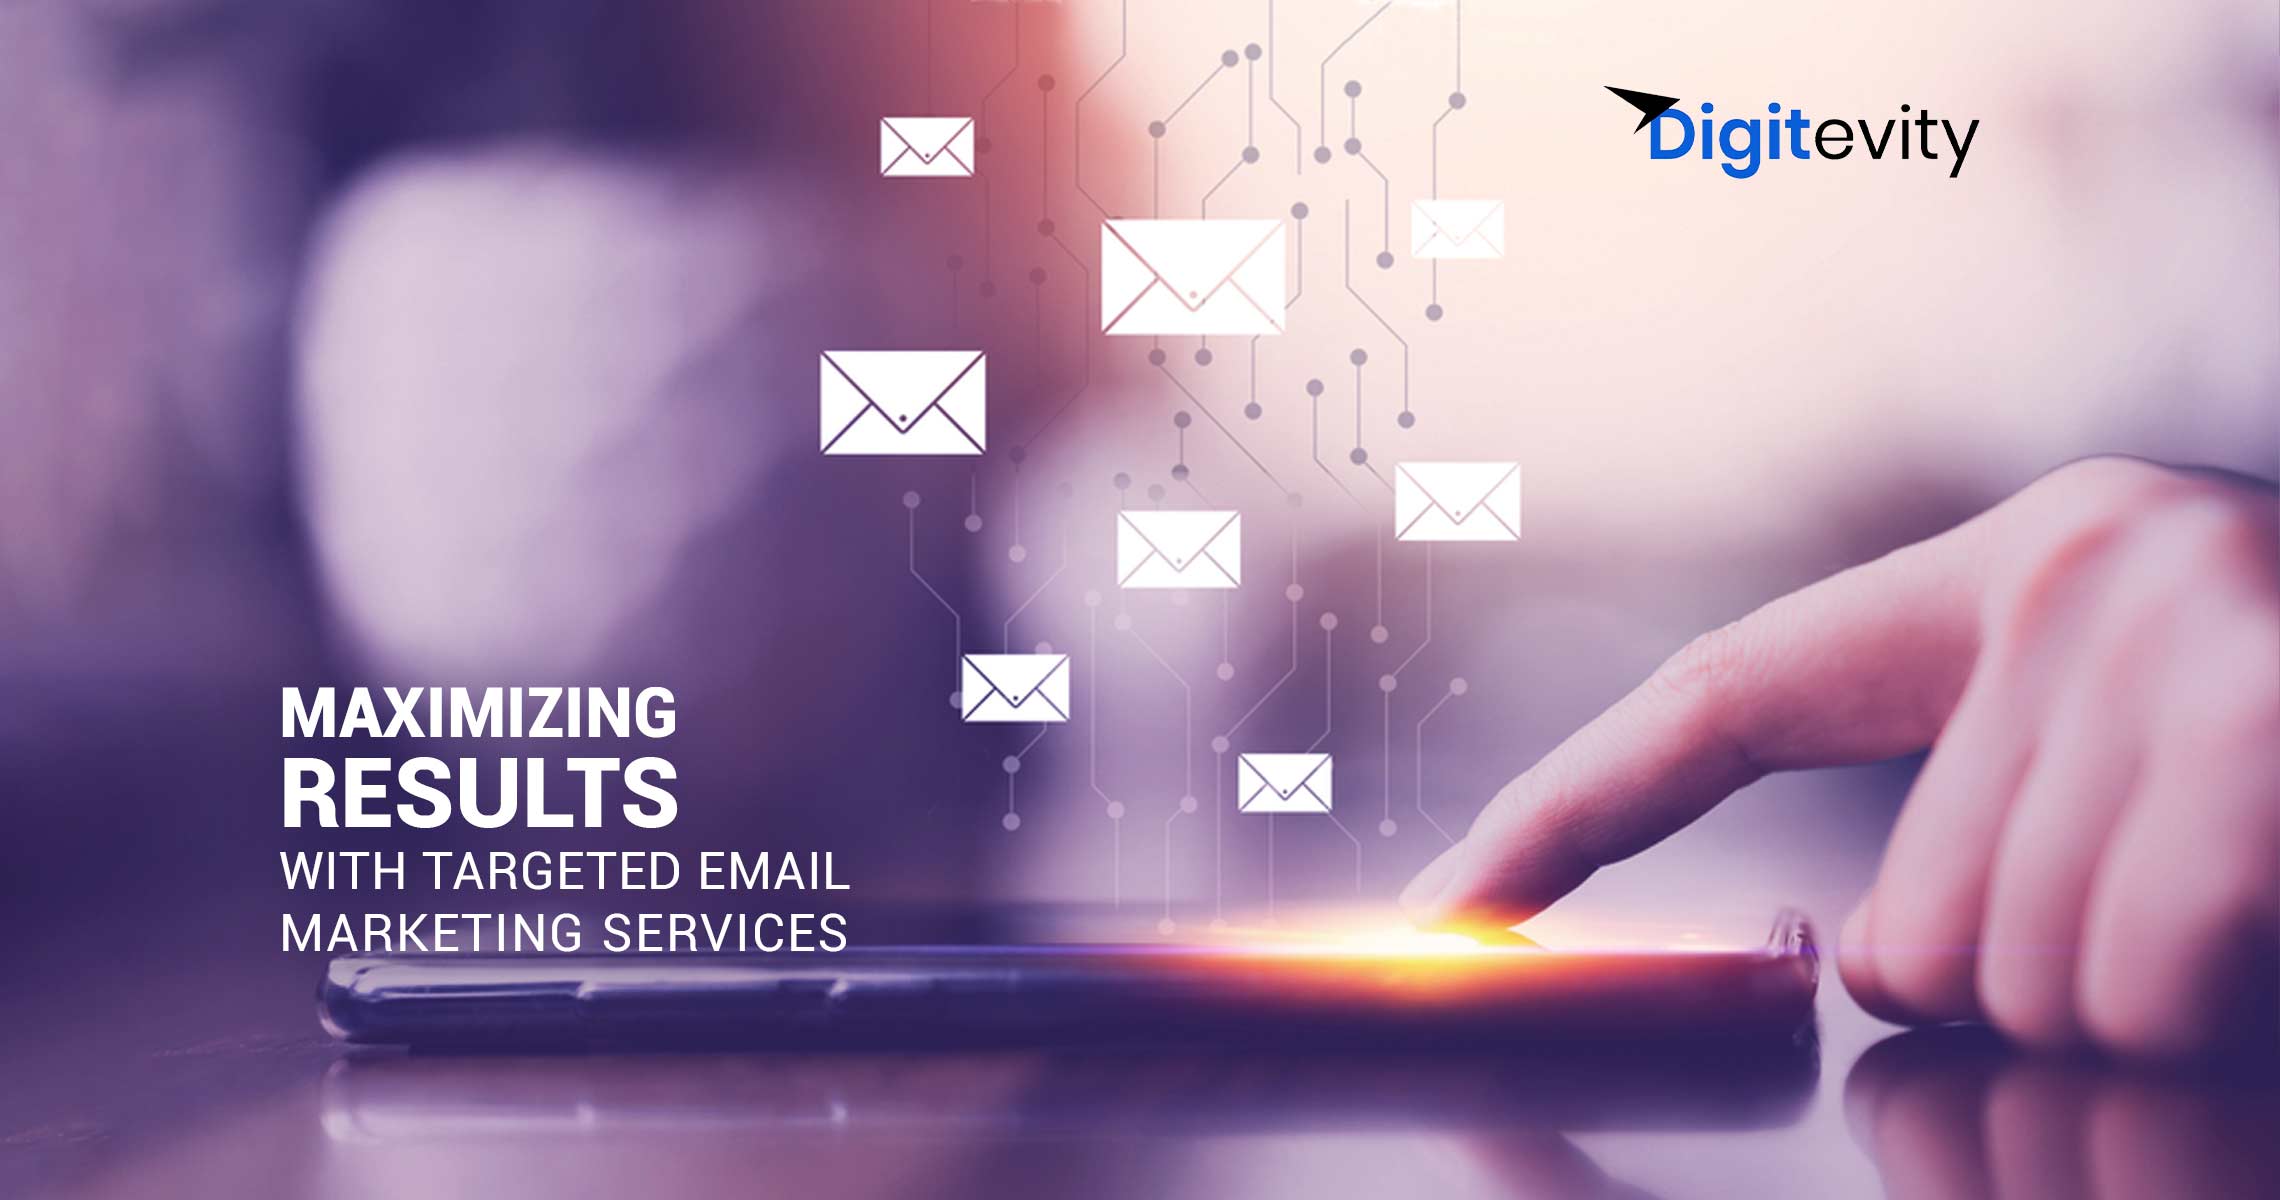 taregeted email marketing services, email marketing target audience, Targeted email marketing services examples, Best targeted email marketing services, full-service email marketing agency